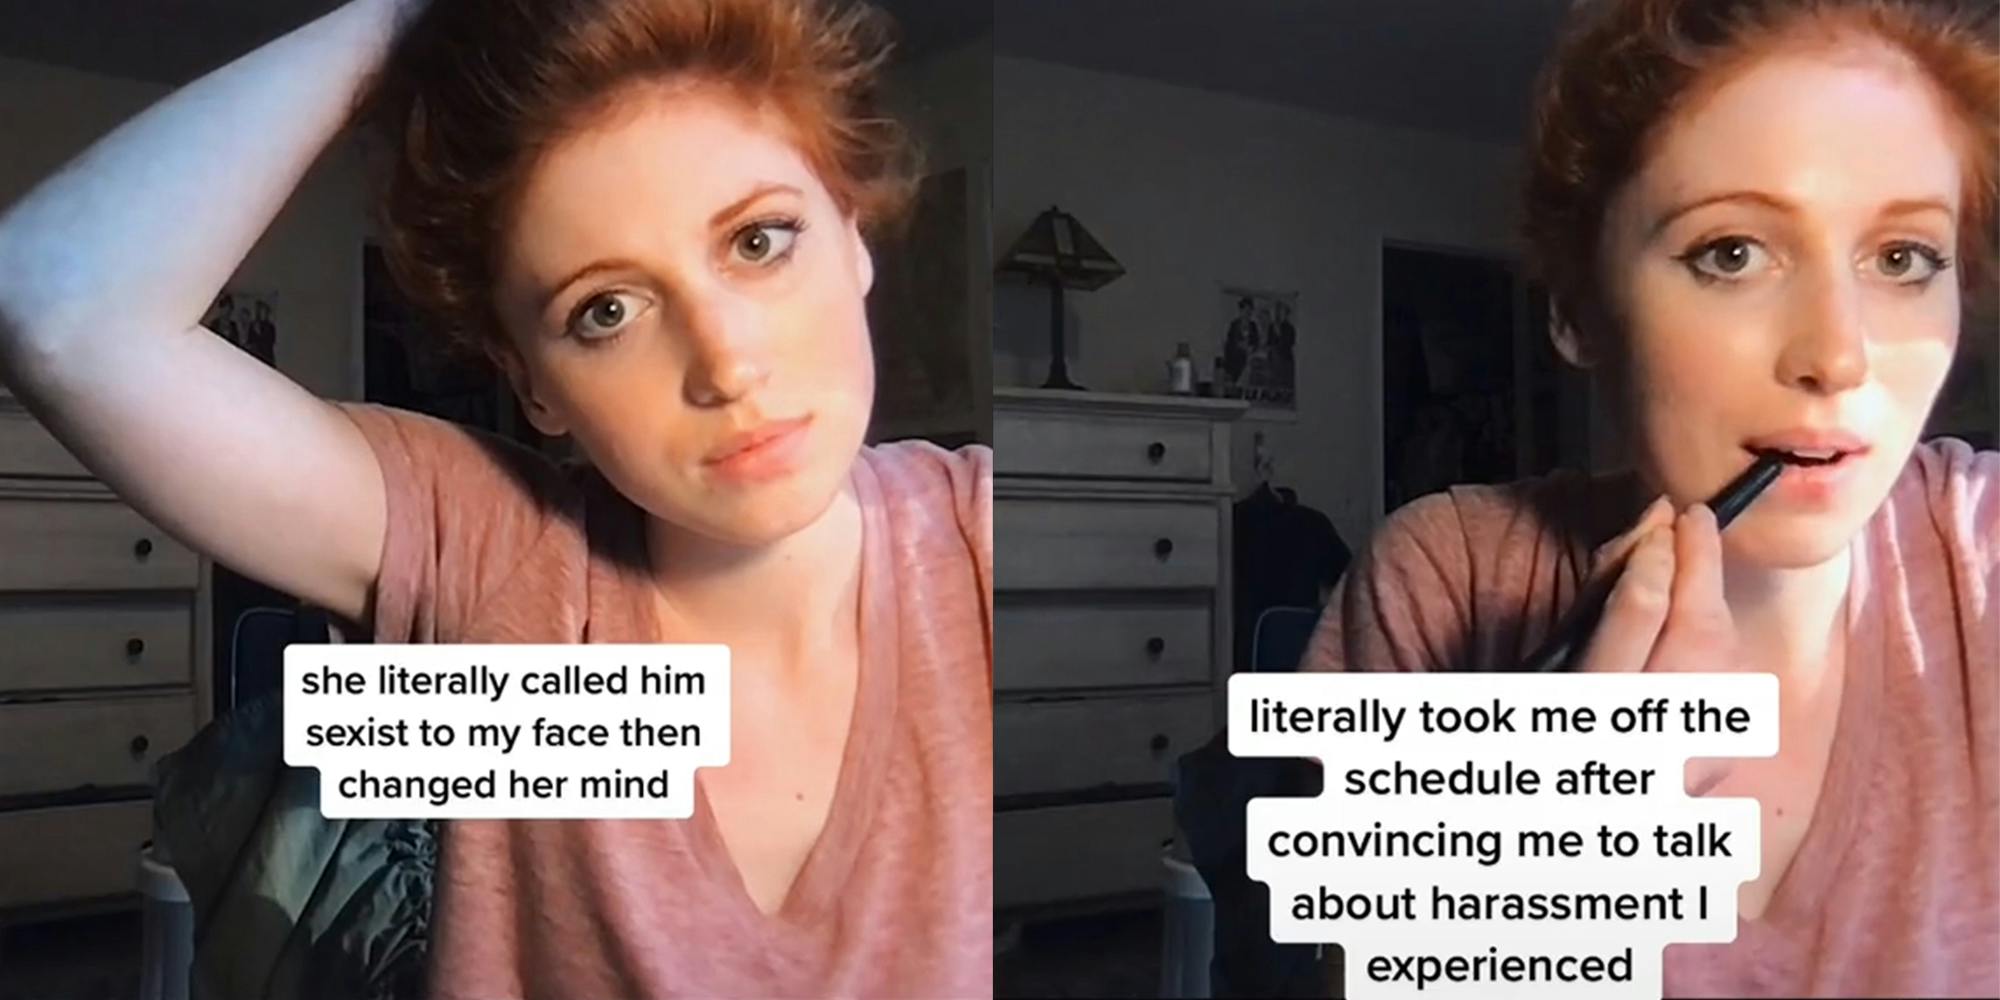 woman holding hair with caption "she literally called him sexist to my face then changed her mind" (l) woman with makeup pen in her mouth with caption "literally took me off the schedule after convincing me to talk about harassment I experienced" (r)